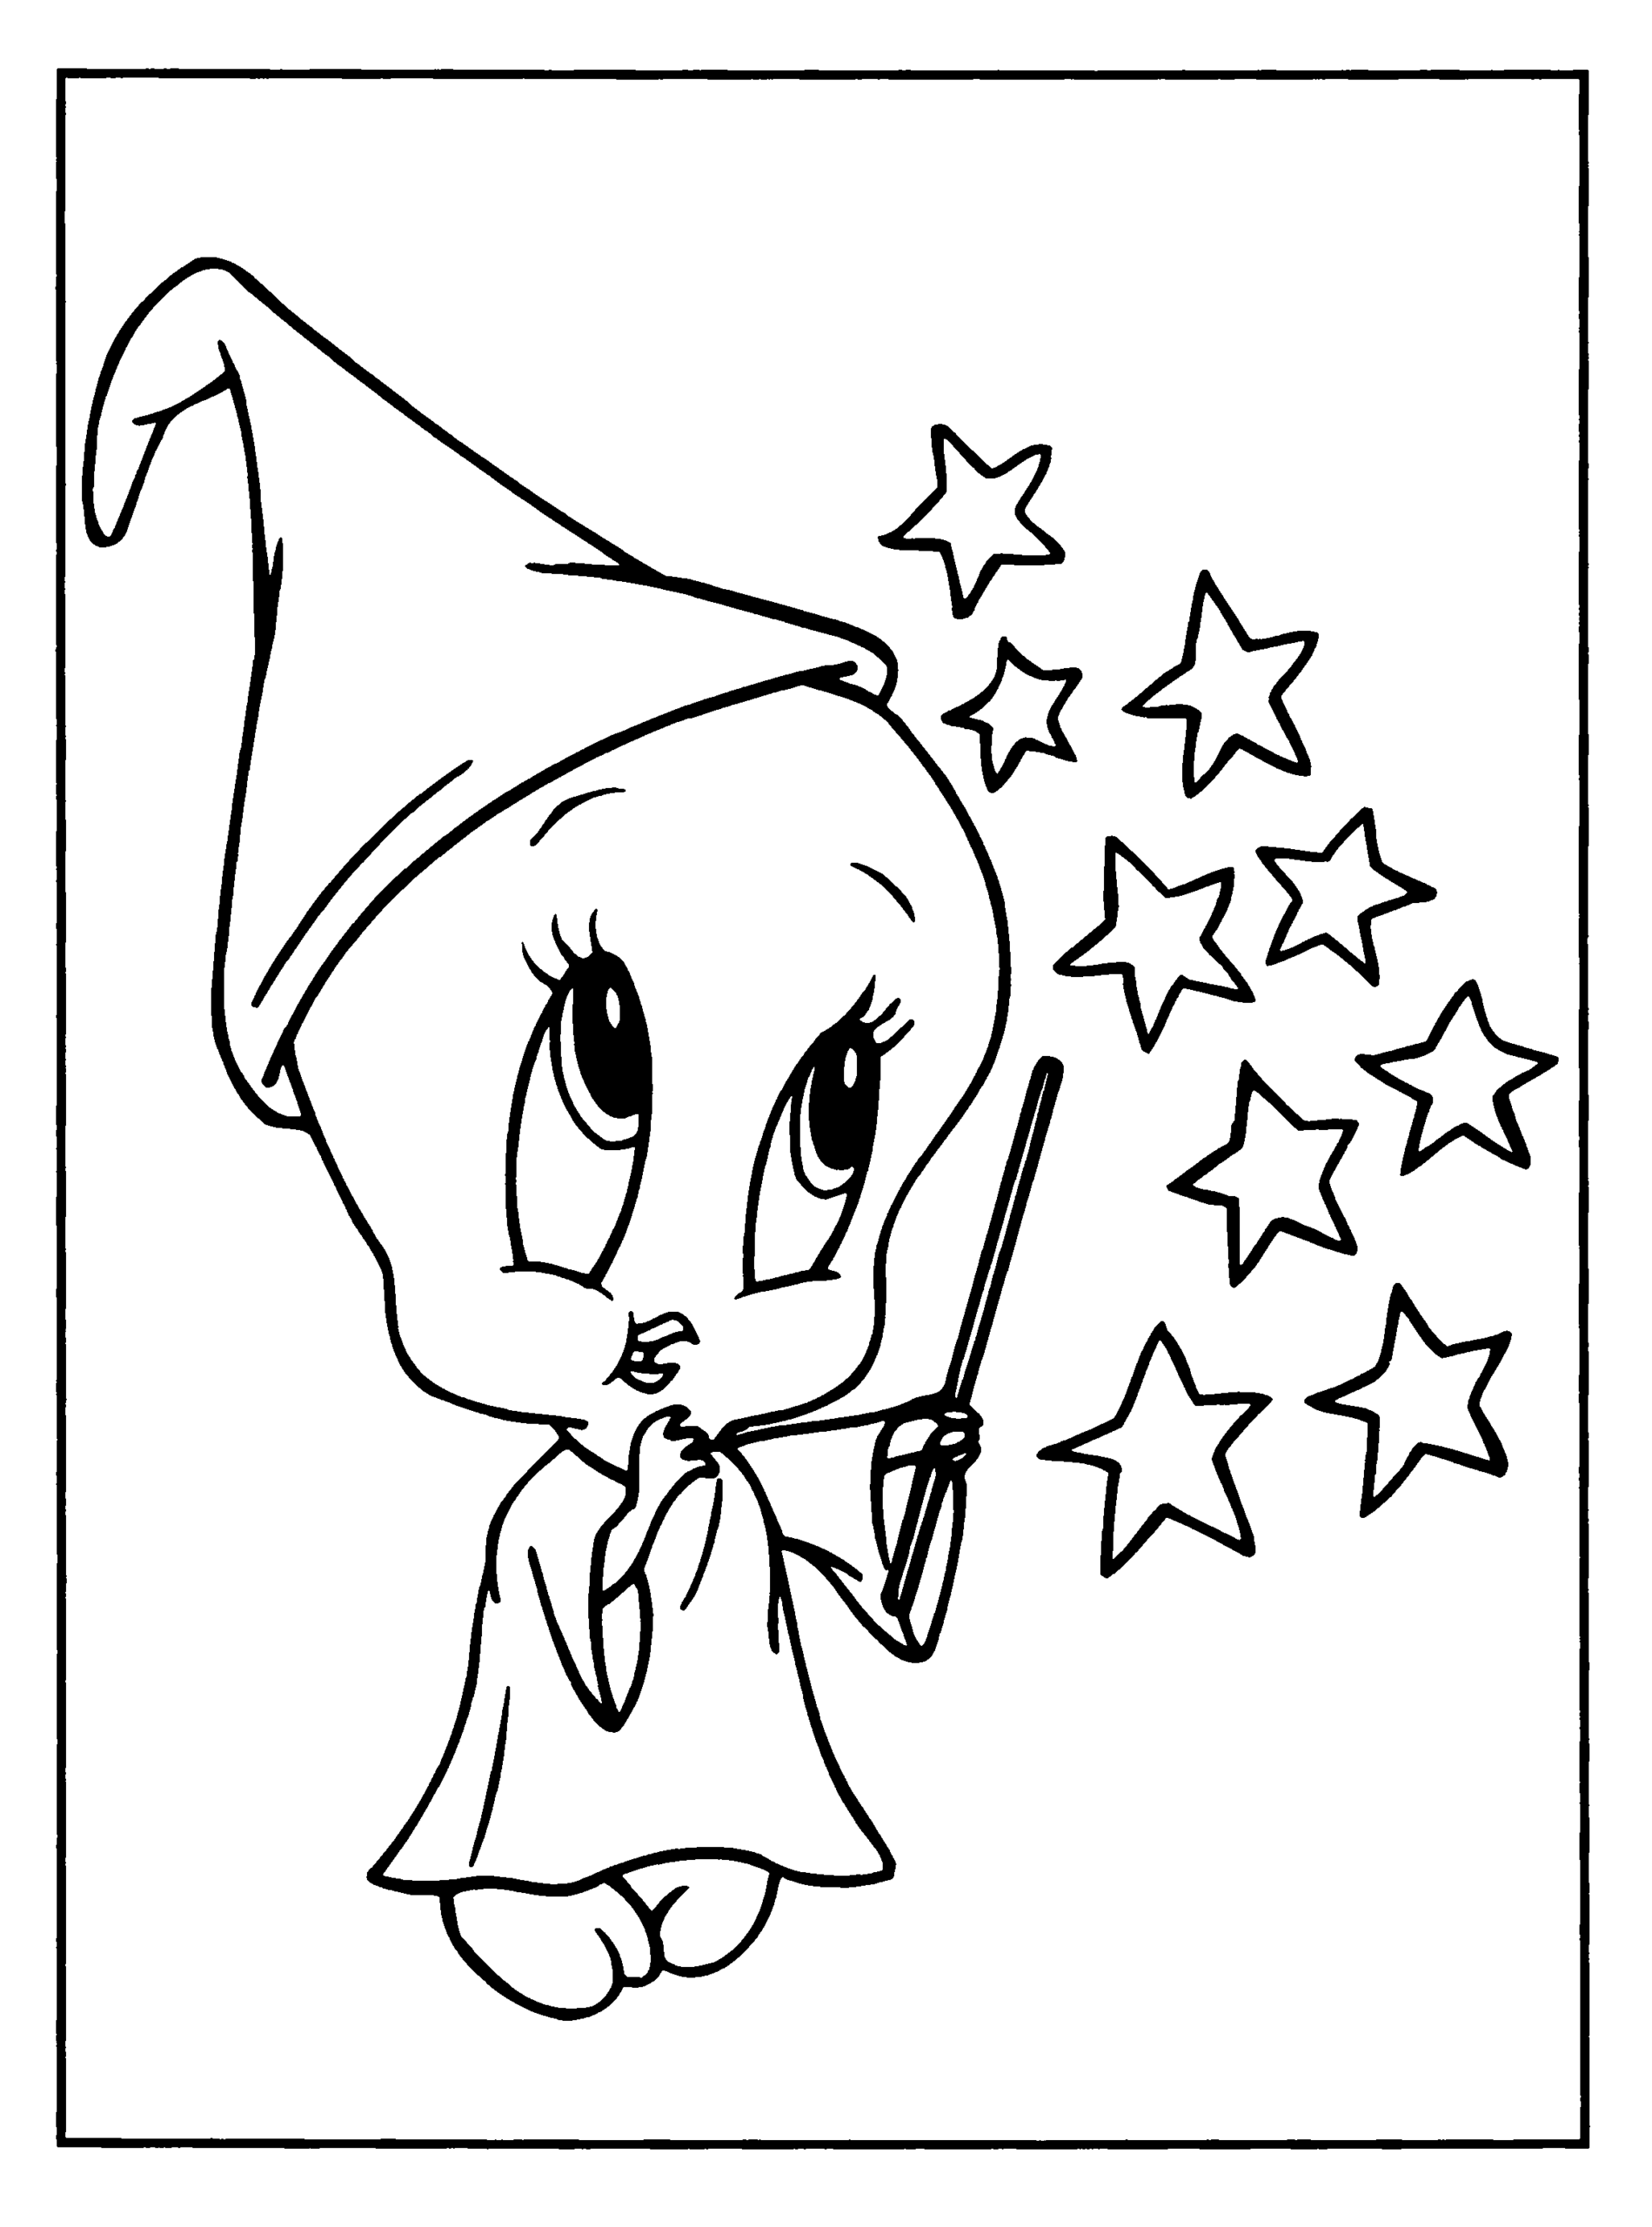 Looney Tunes Coloring Pages TV Film looney tunes 9 Printable 2020 04598 Coloring4free